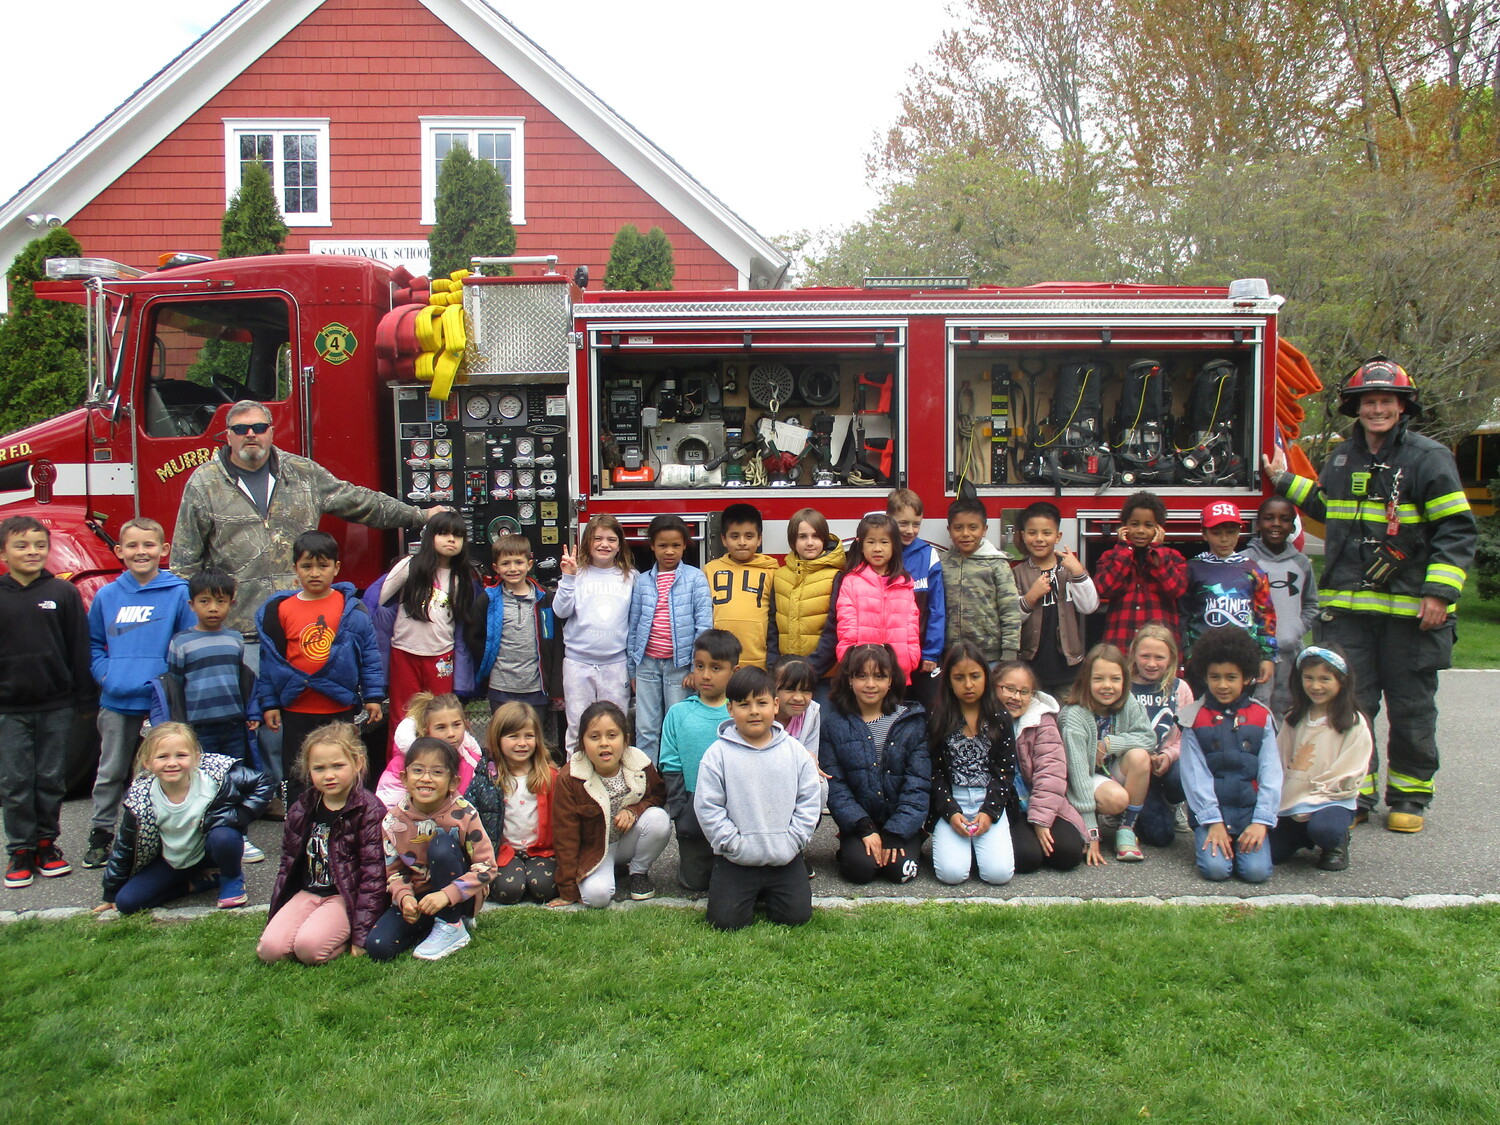 Students from Wainscott School visited the Sagaponack School on Friday so that all could learn from the firefighters from the Sag Harbor Fire Department, which brought a truck over to the school for the lesson. The fire safety lesson was presented by Captain Bayard Fenwick of the department's Murray Hill Hose Company 4 squad. COURTESY SAGAPONACK SCHOOL